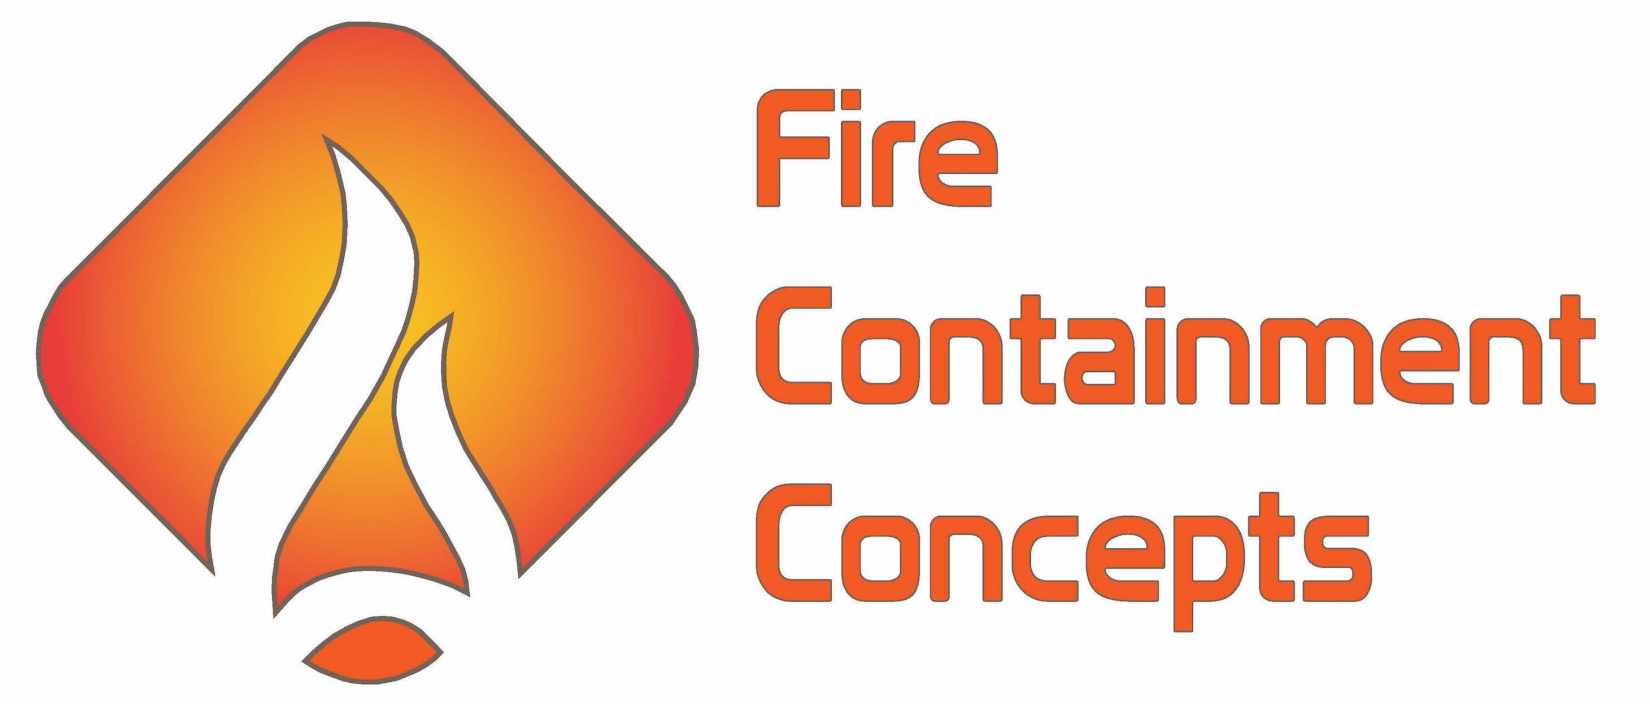 Fire Containment Concepts